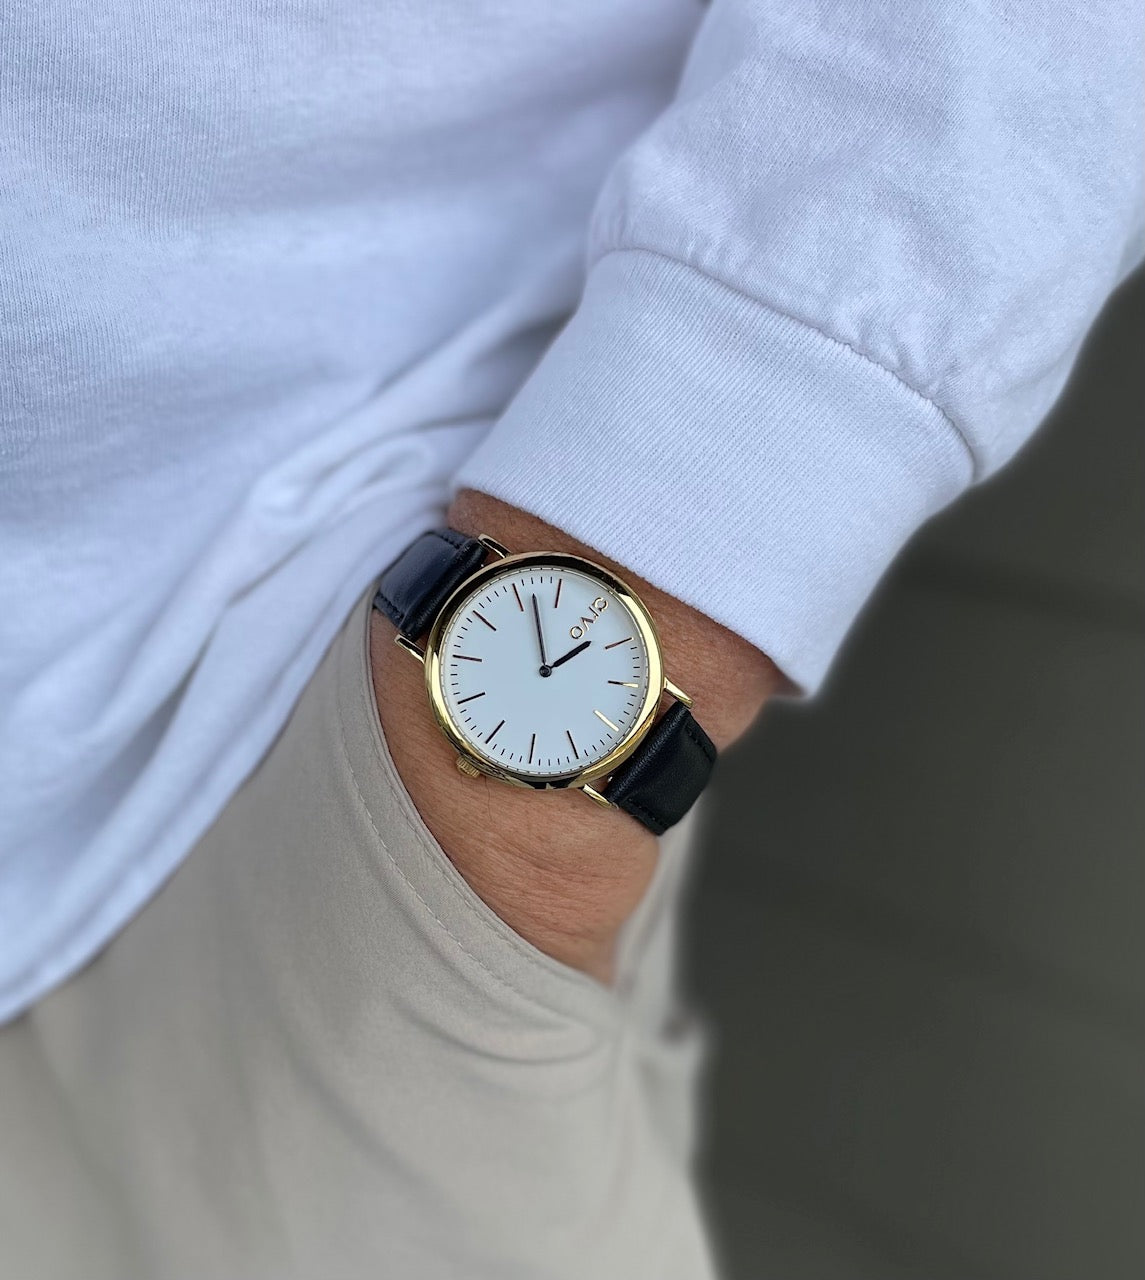 Arvo Time Sawyer Watch for men and women on a man's wrist. His hand is in his pocket. Watch features a white dial, gold case, and black leather band